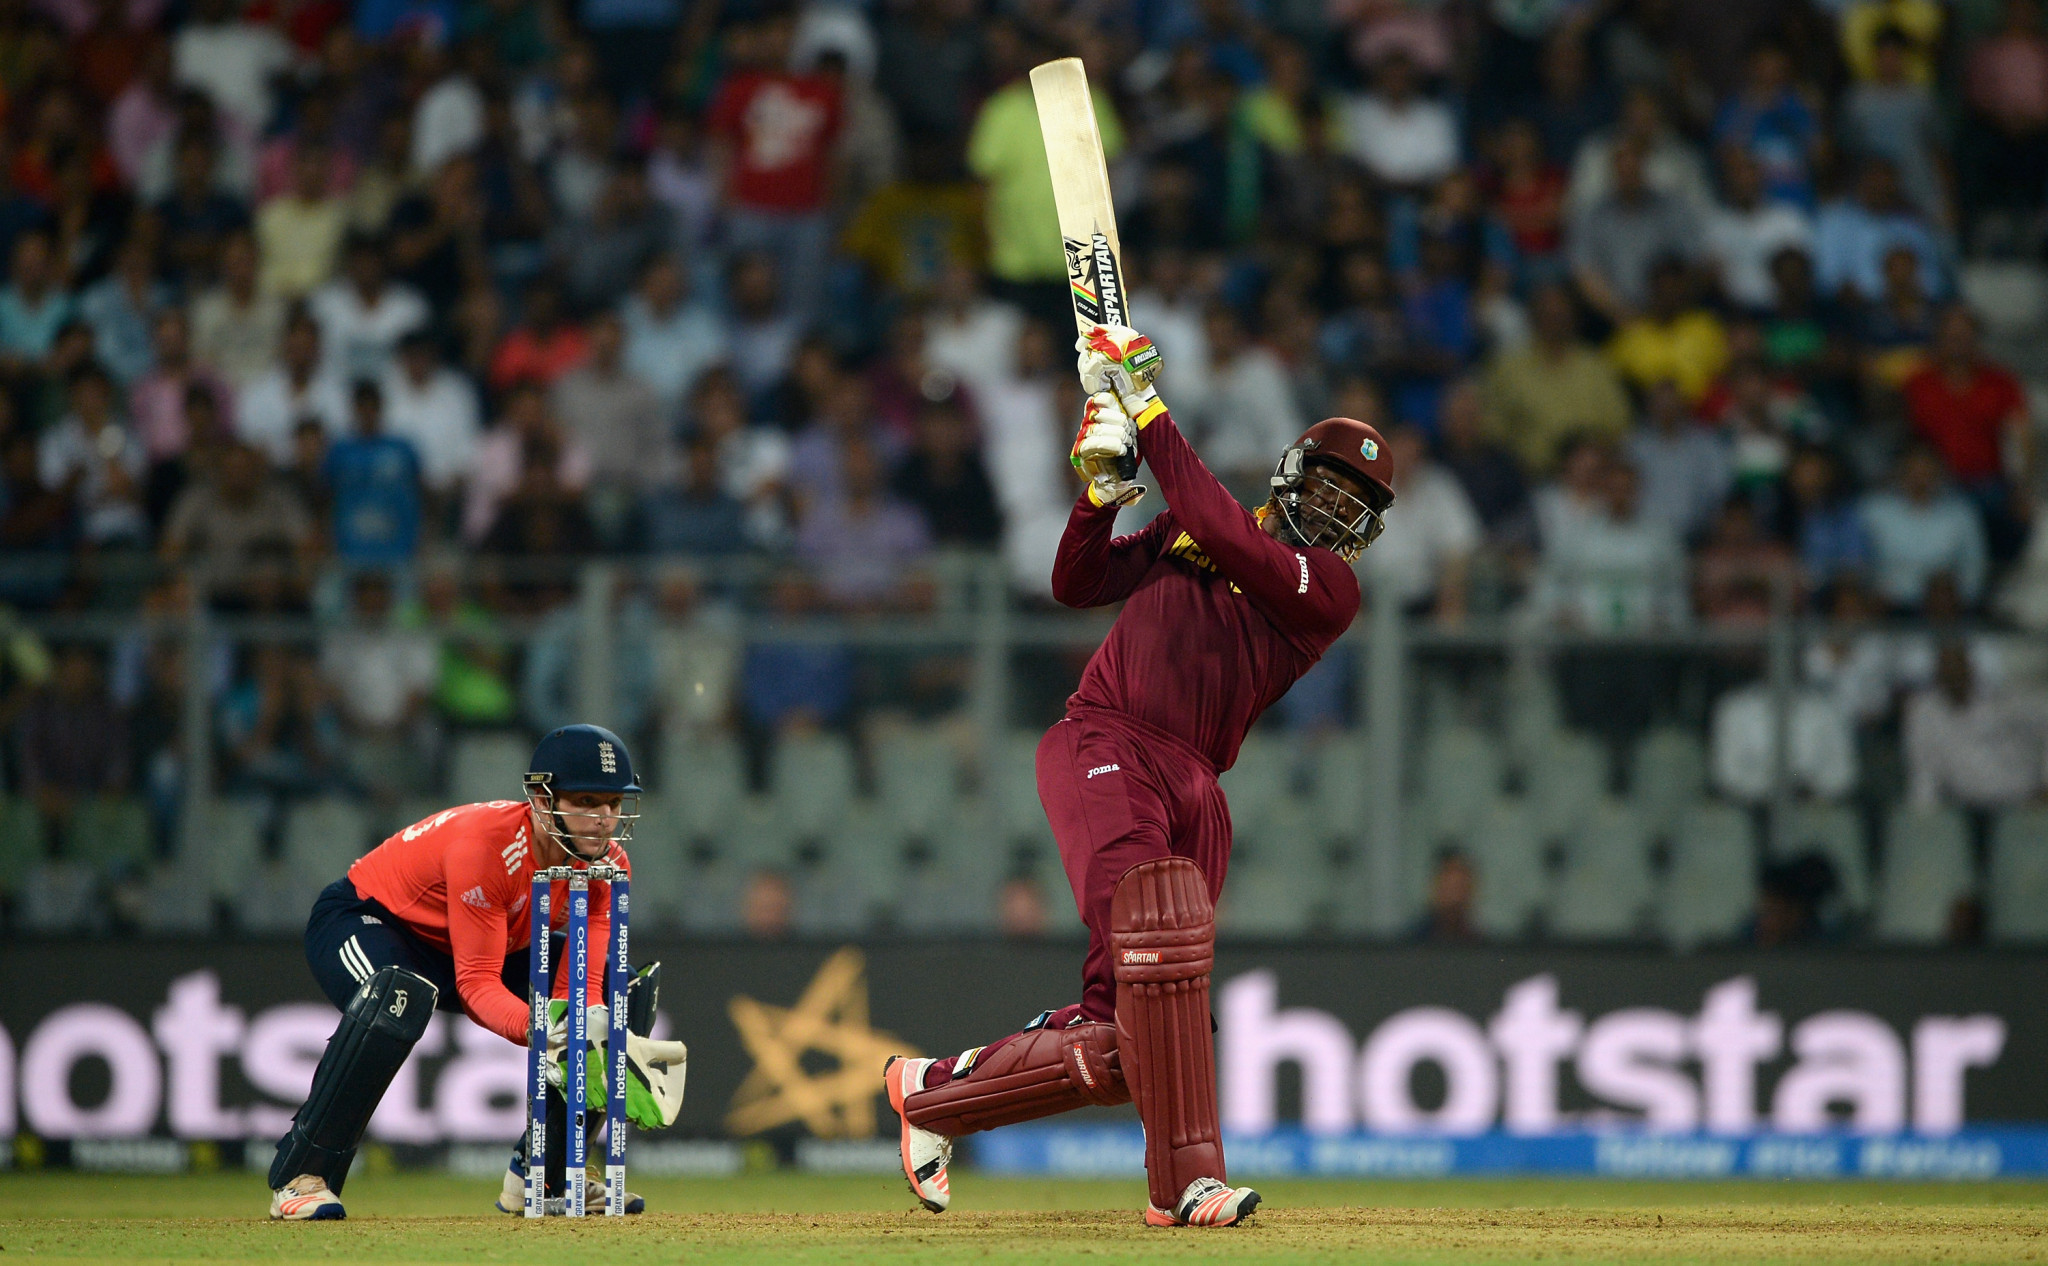 The barnstorming Chris Gayle will be hoping to lead the West Indies to a third T20 ICC World Cup title ©Getty Images